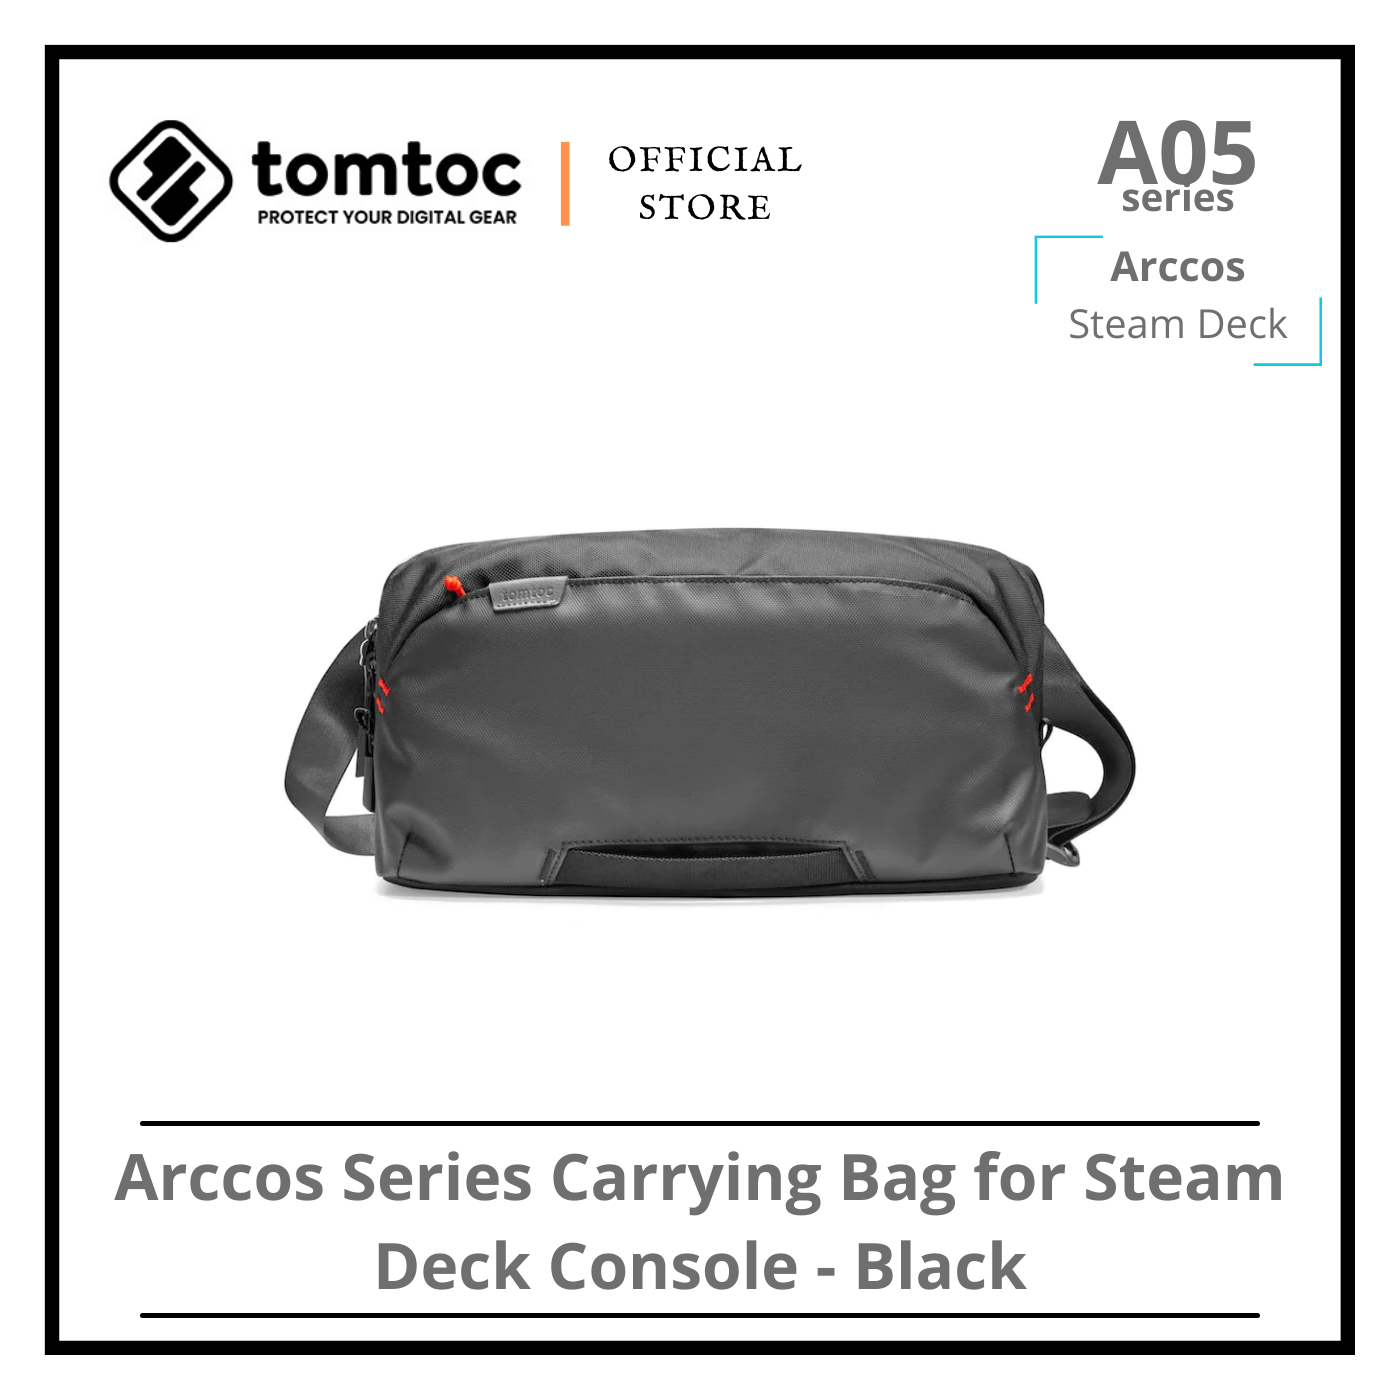 Best ROG ALLY Carrying case? Tomtoc Arccos Series carrying bag